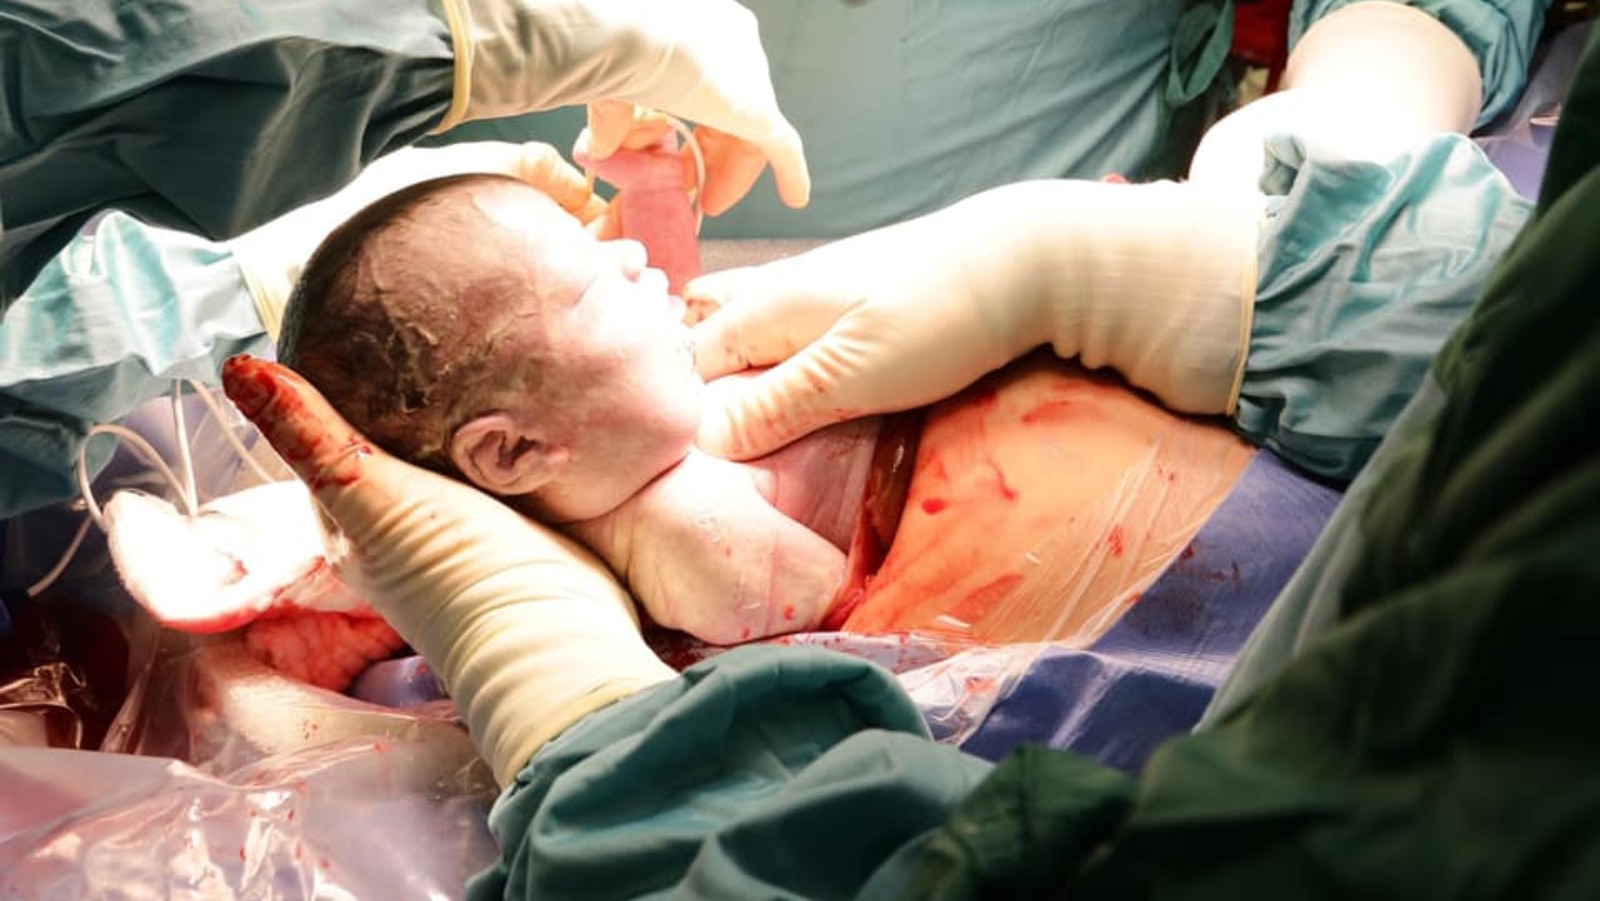 The baby born October 14, 2020, after an ex utero intrapartum procedure at Tel Aviv Sourasky Medical Center. Photo: courtesy